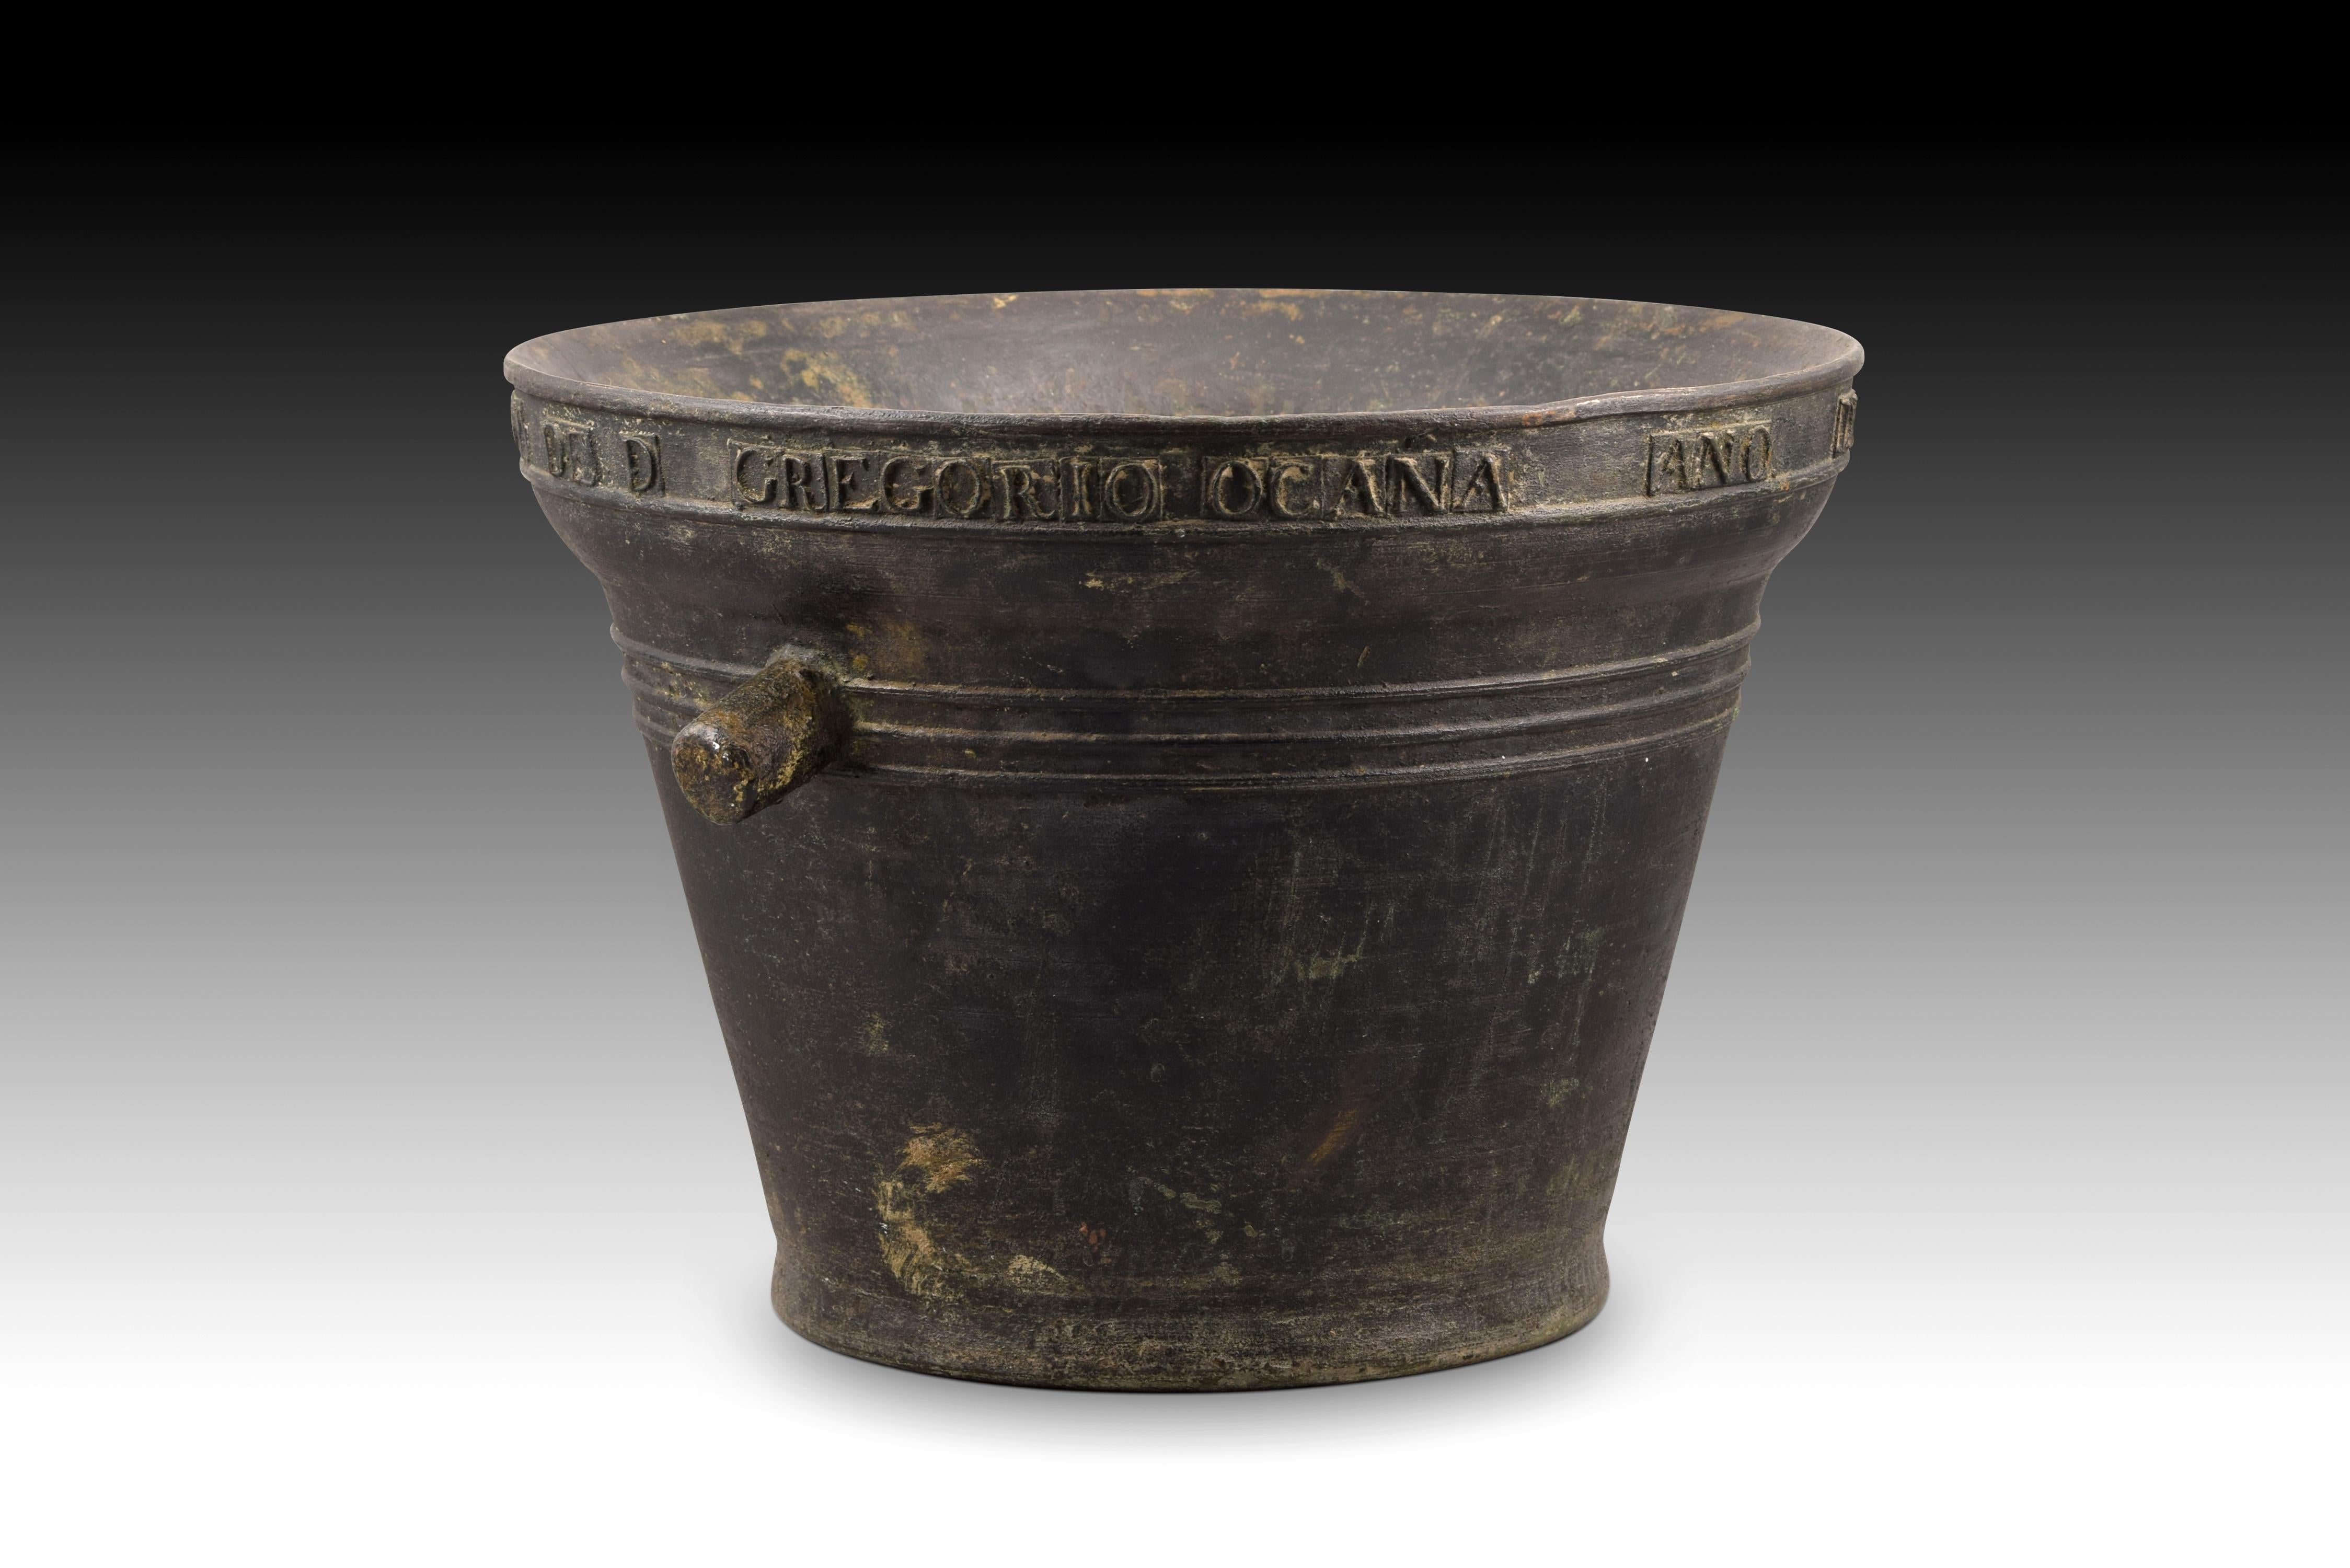 Neoclassical Revival Mortar with Inscriptions. Bronze, Spain, 1823